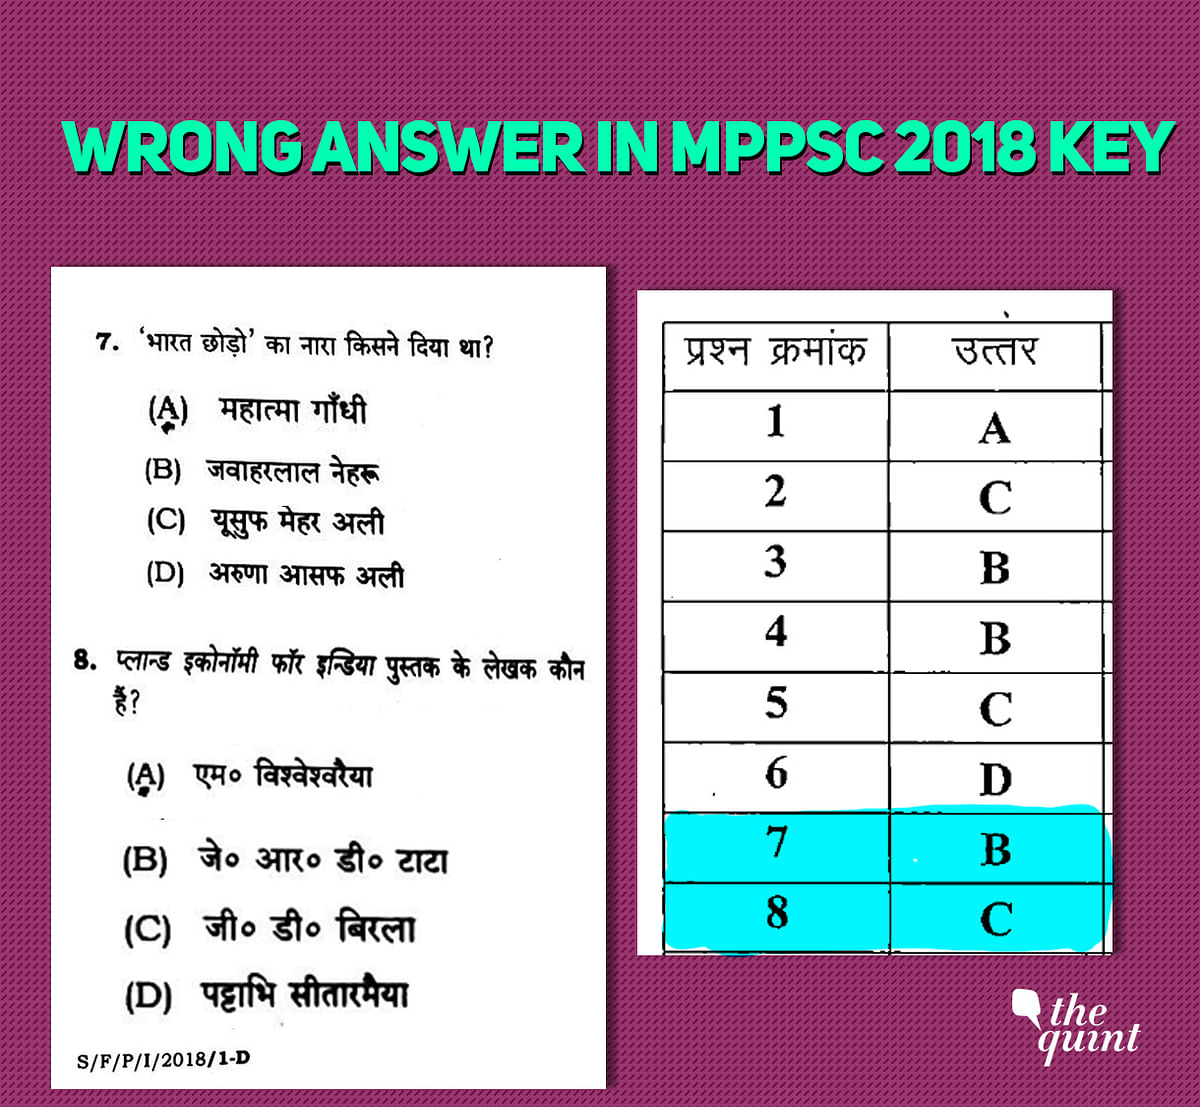 Errors in the answer key of MPPSC 2018 exposes inadequacies of the board that simply ‘deletes’ questions every year.